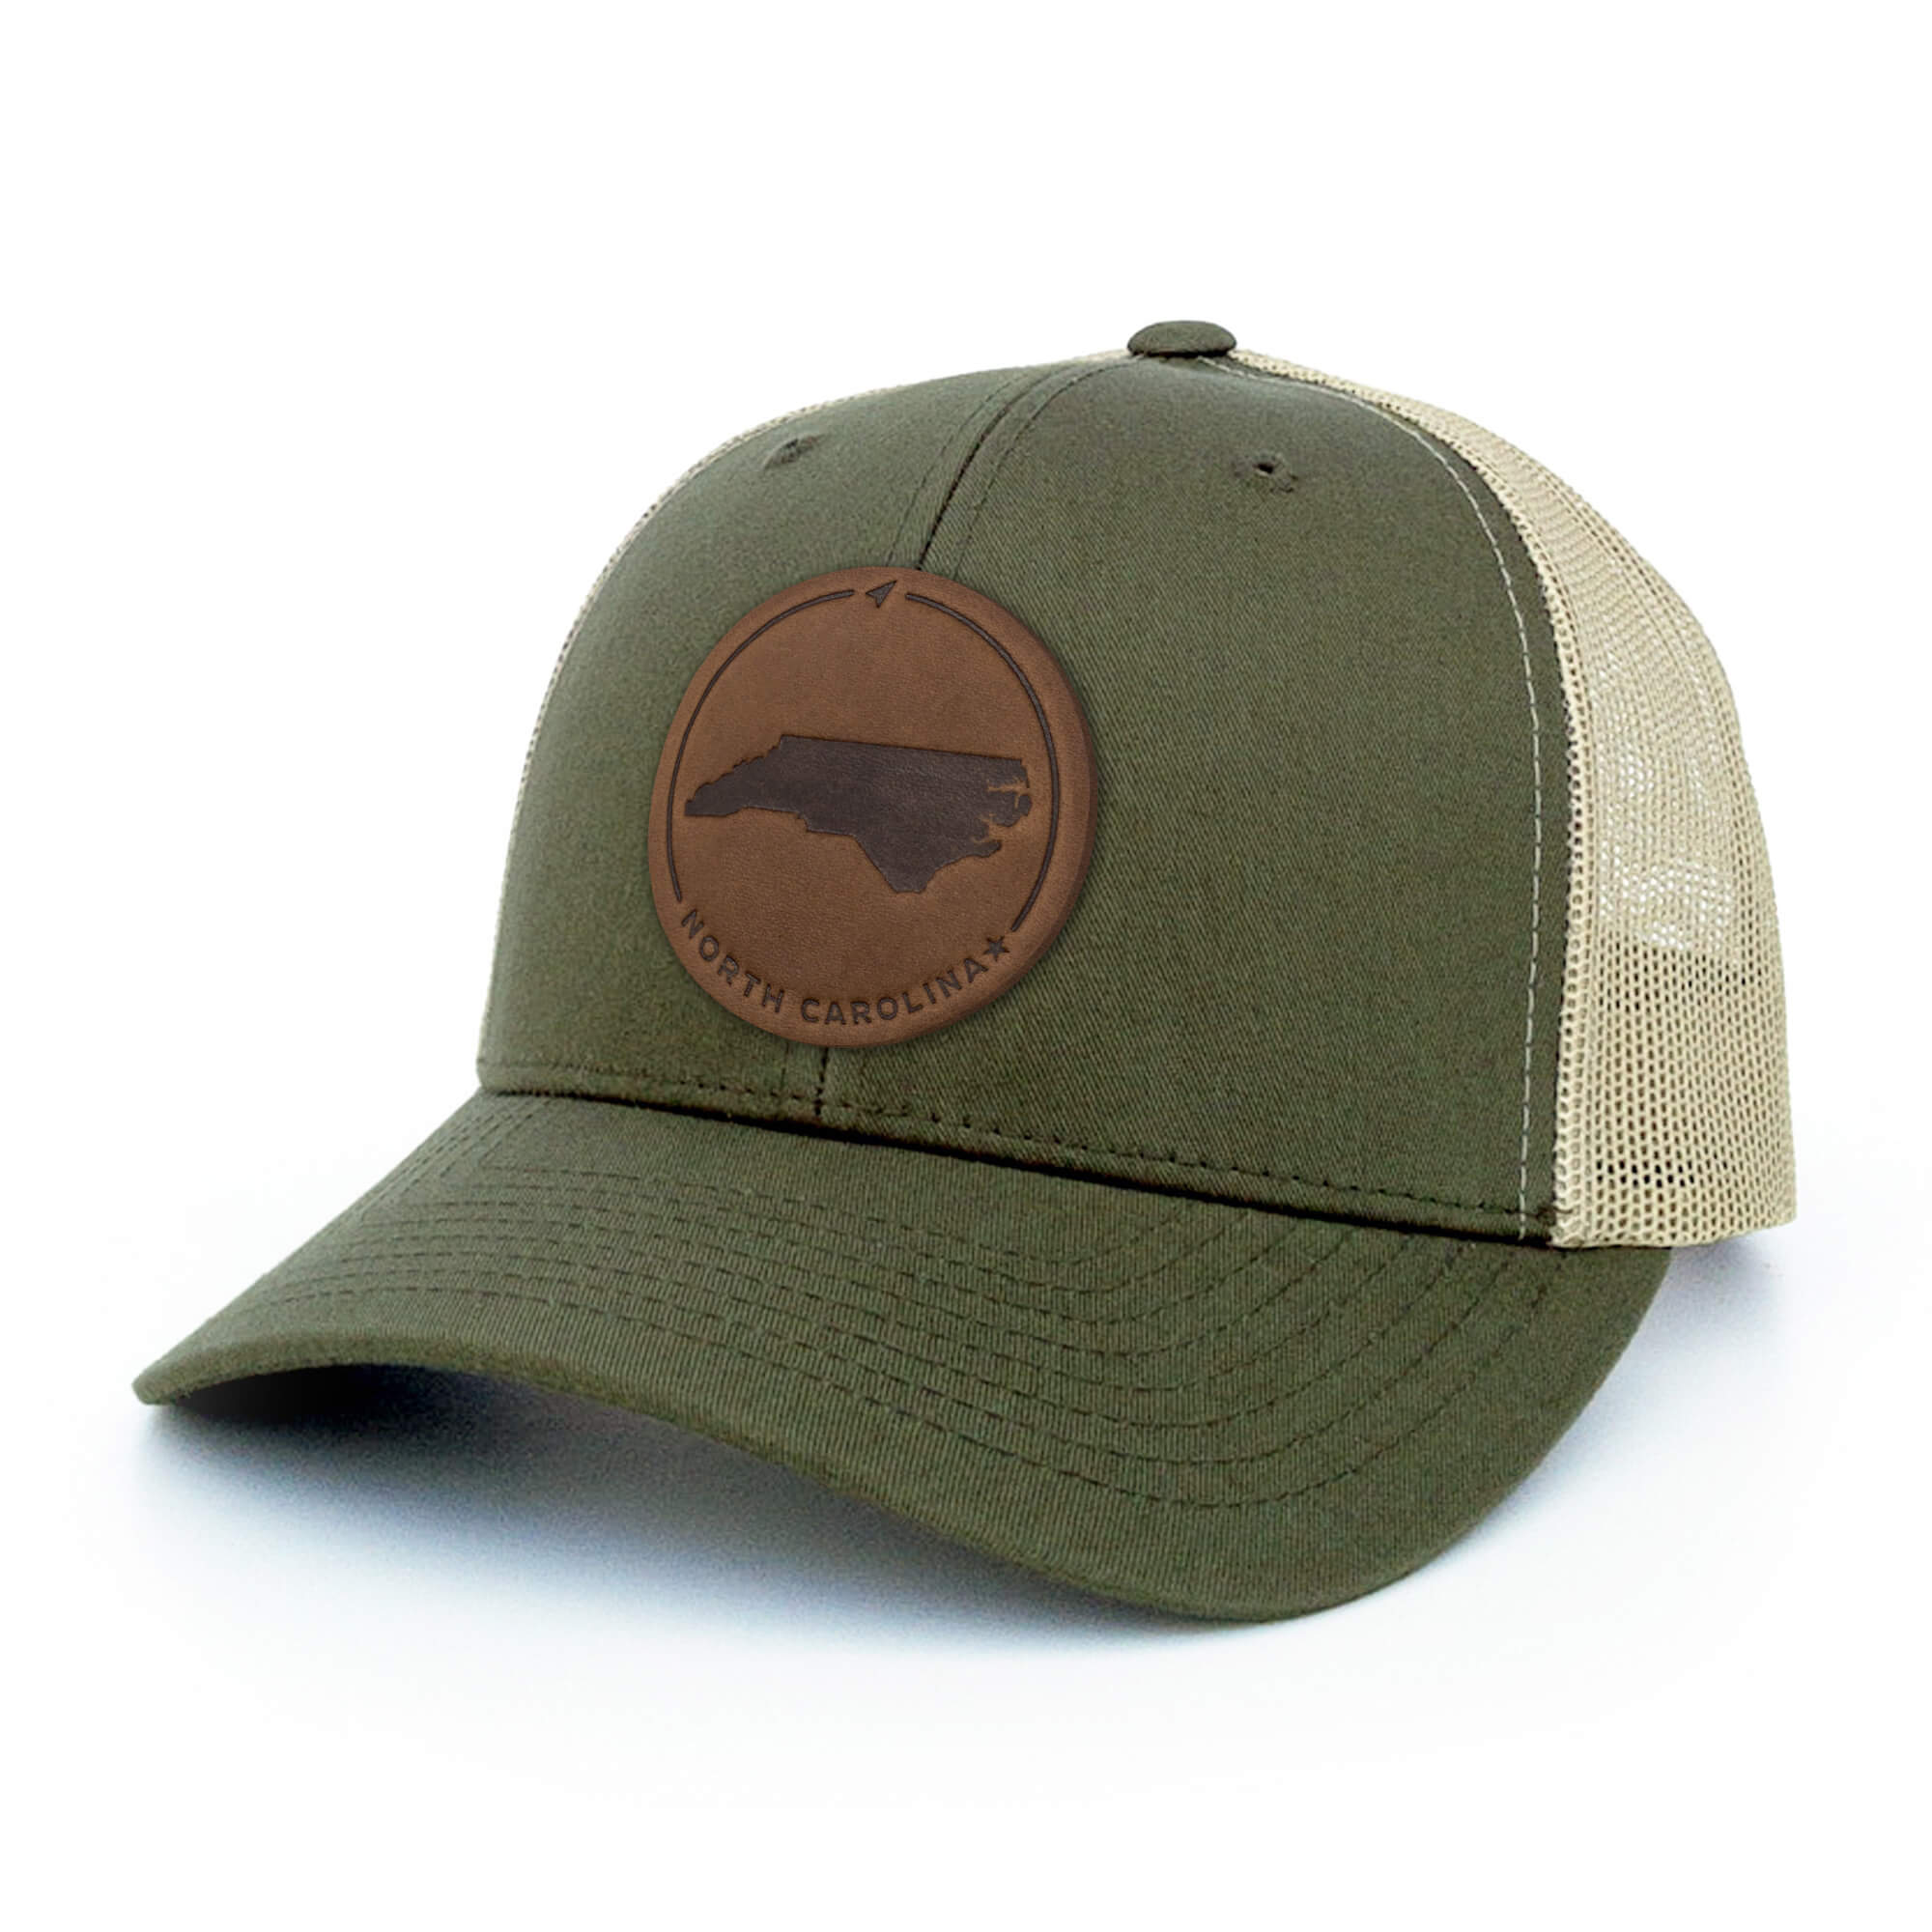 Moss and khaki trucker hat with full-grain leather patch of North Carolina | BLACK-003-005, CHARC-003-005, NAVY-003-005, HGREY-003-005, MOSS-003-005, BROWN-003-005